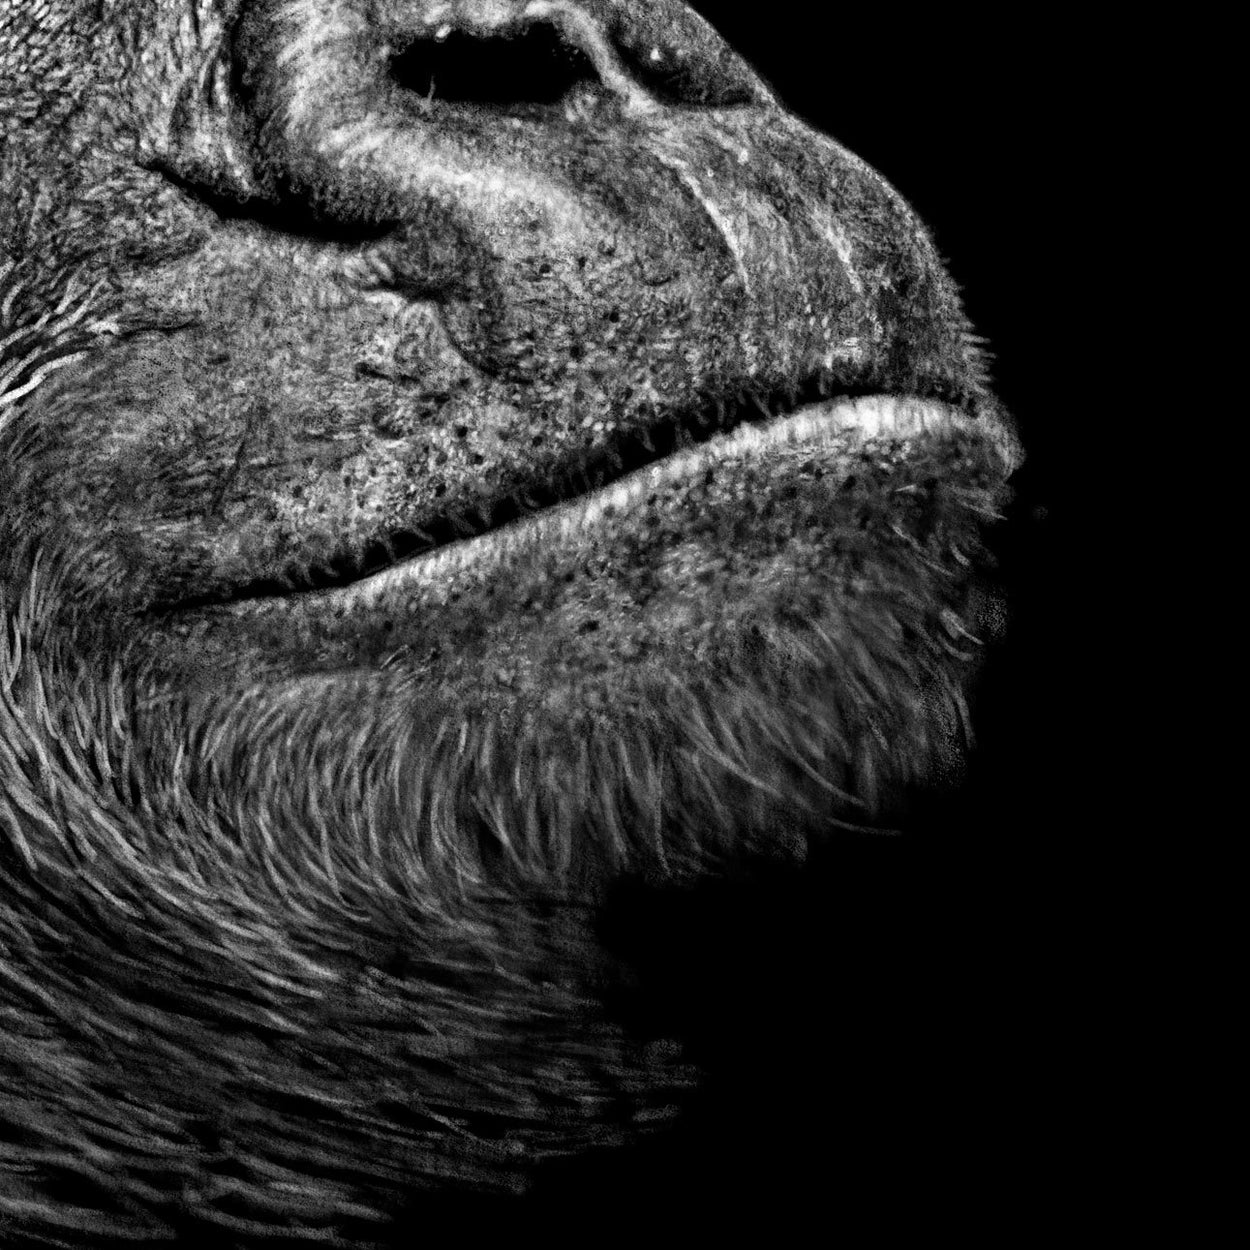 Gorilla Drawing Close-up - The Thriving Wild